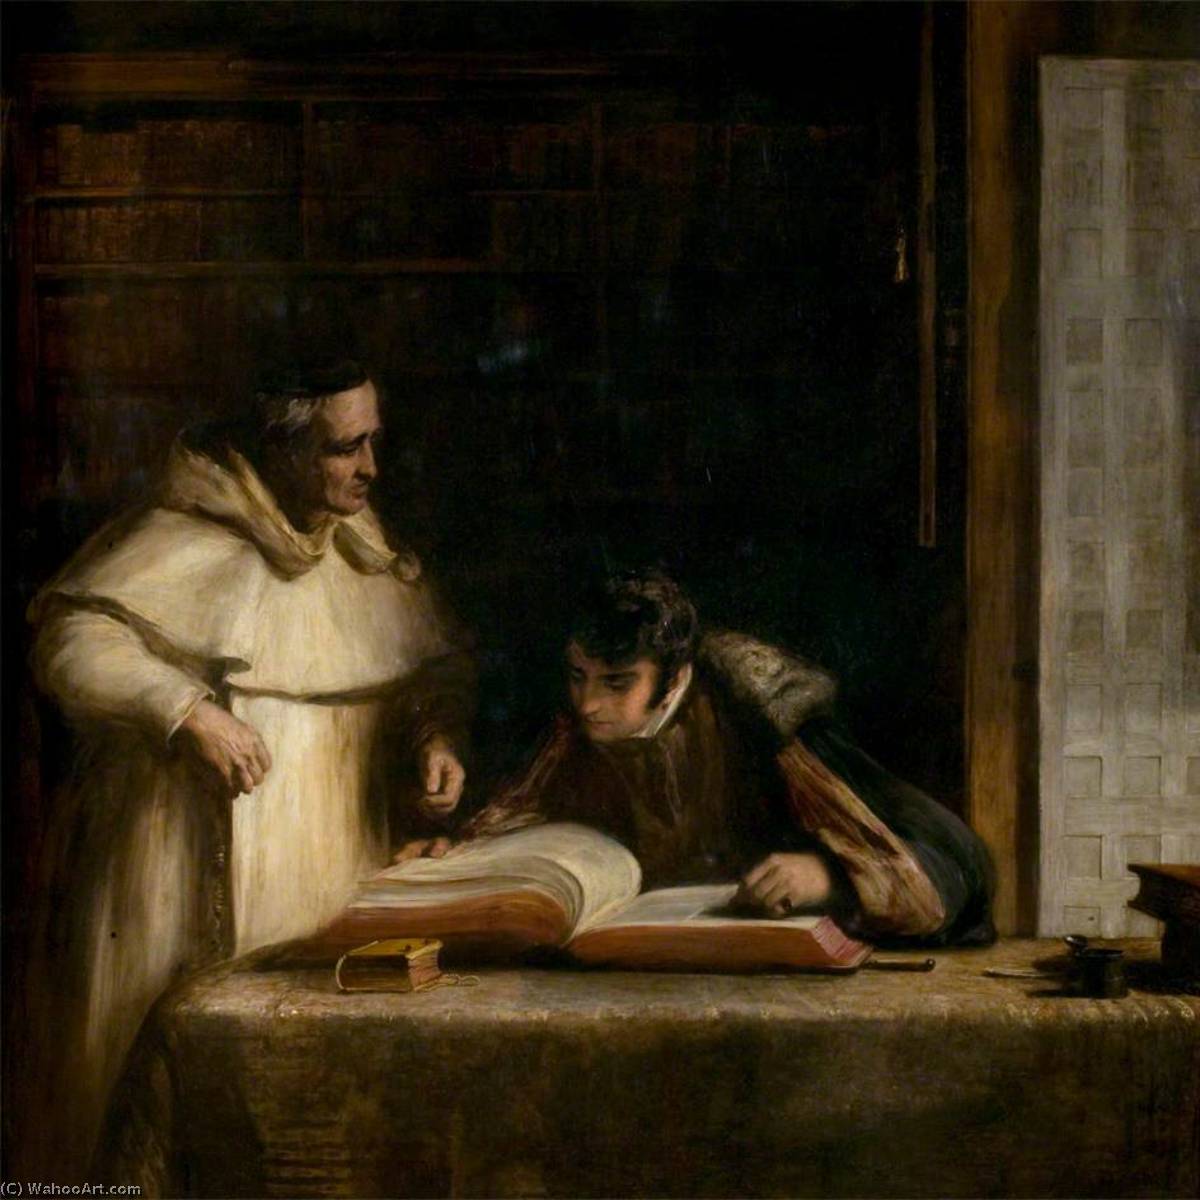 WikiOO.org - 백과 사전 - 회화, 삽화 David Wilkie Wynfield - Washington Irving in the Archives of Seville